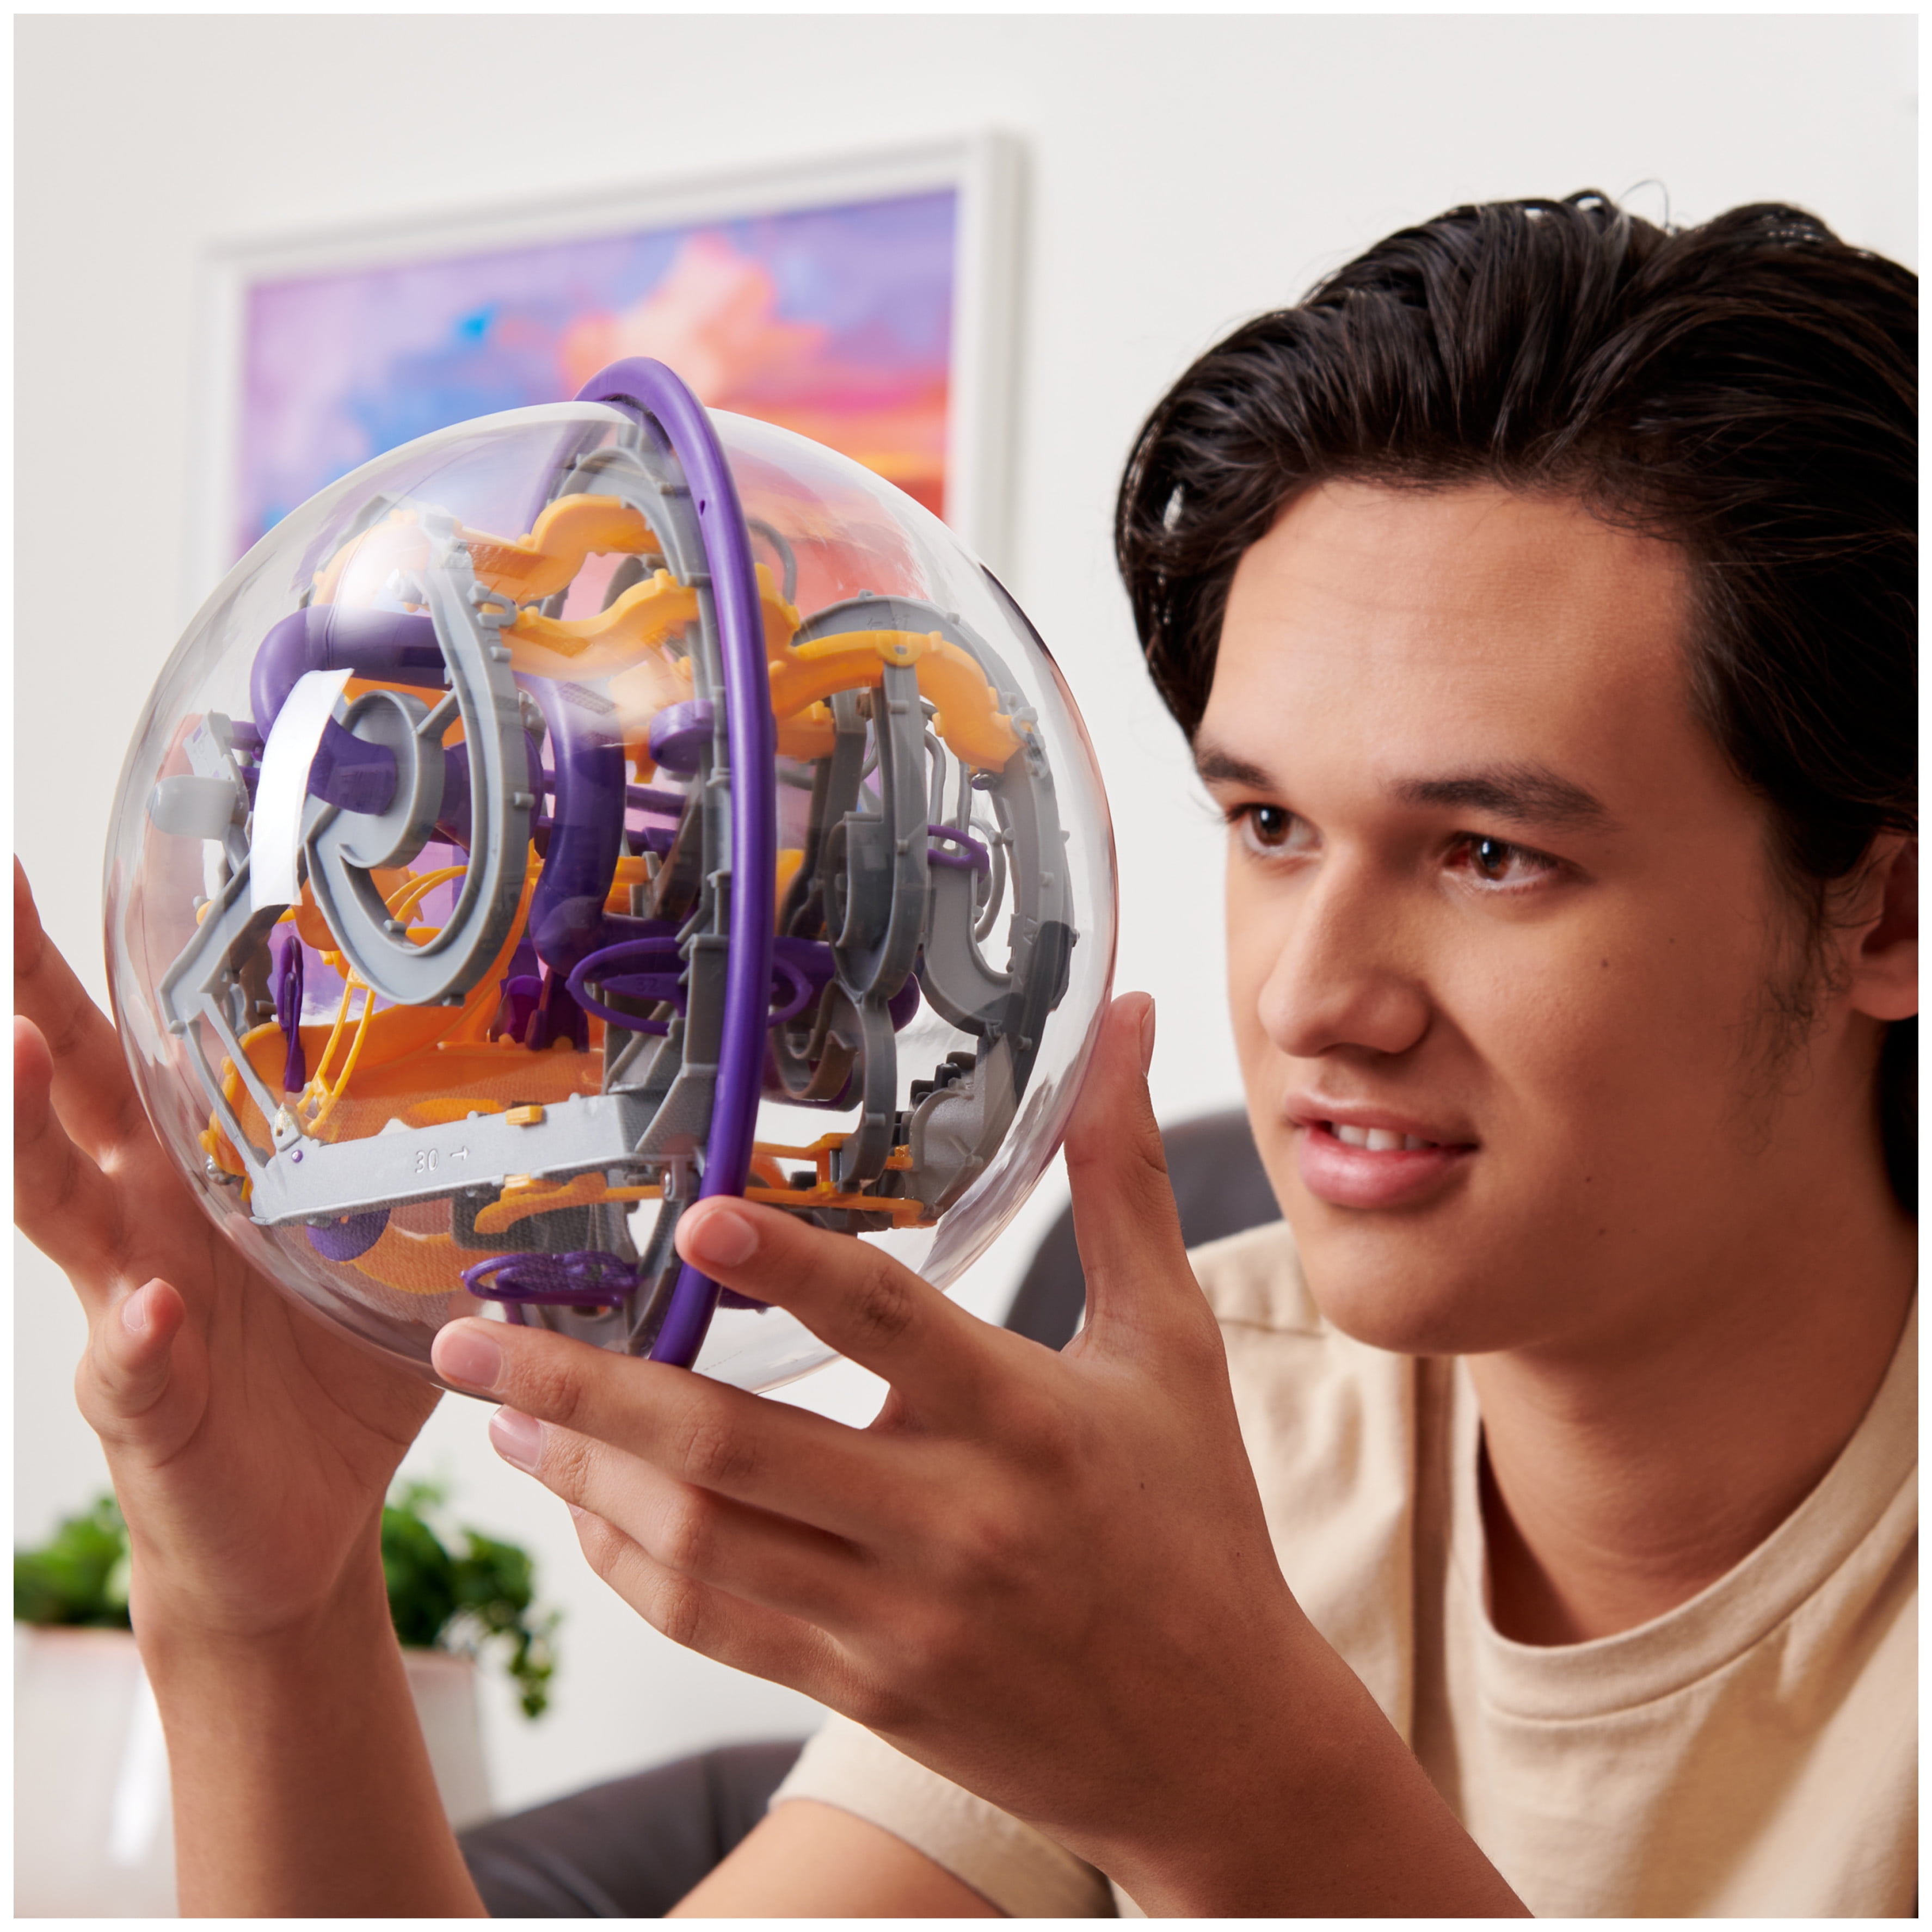 Perplexus and other 3D marble maze collection. : r/perplexus